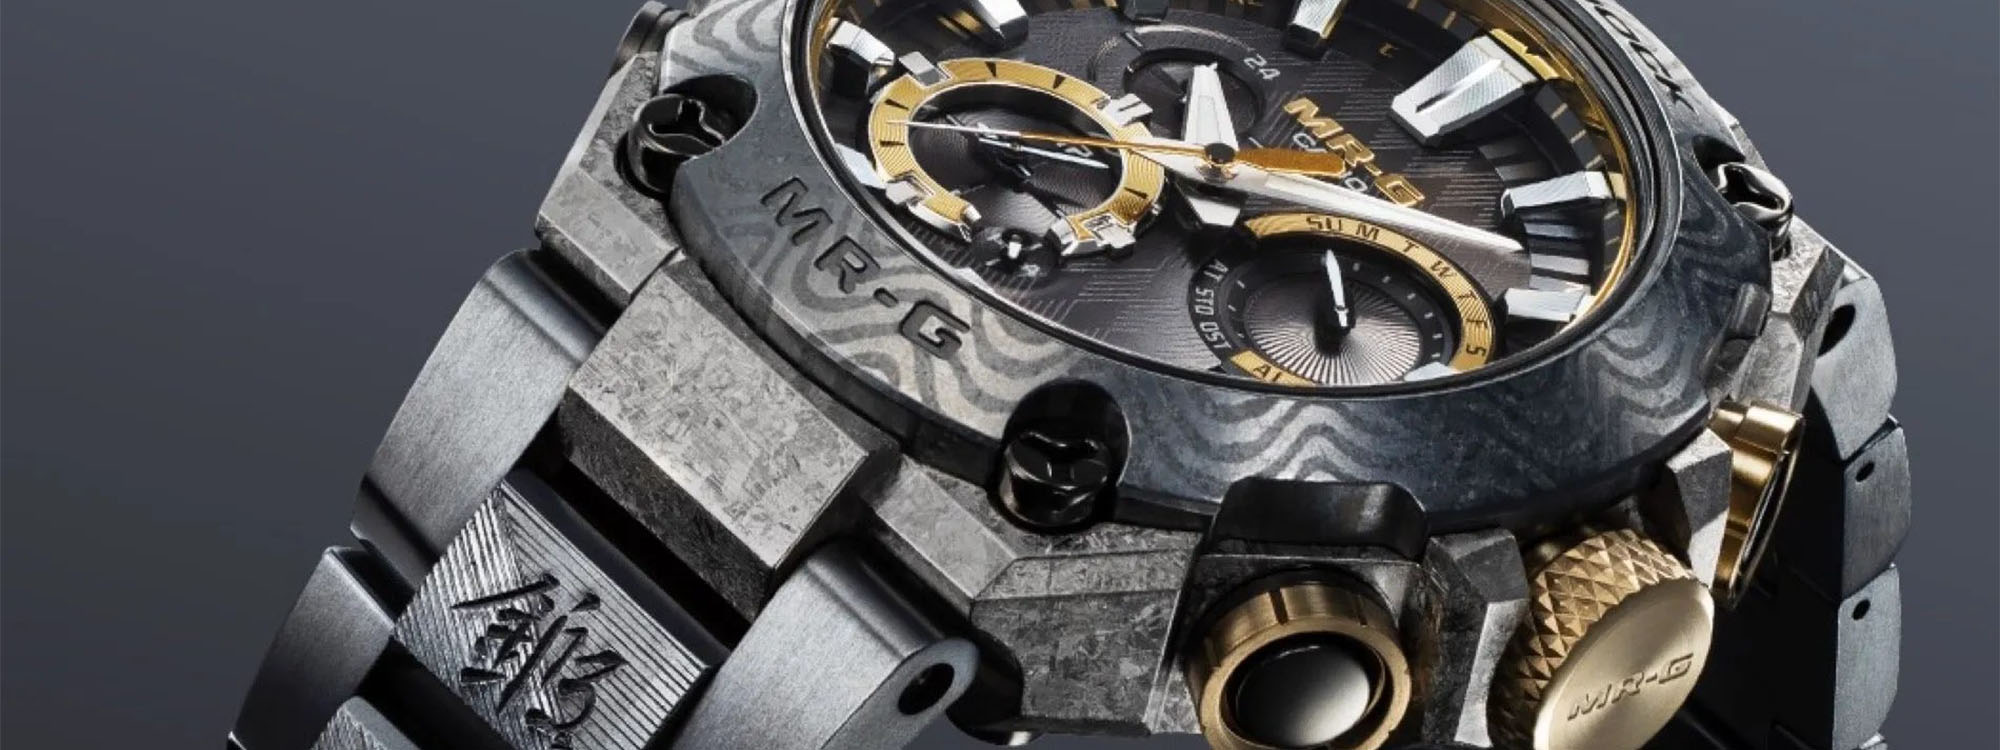 Counting Down the 5 Most Expensive G-Shock Watches | Teddy Baldassarre